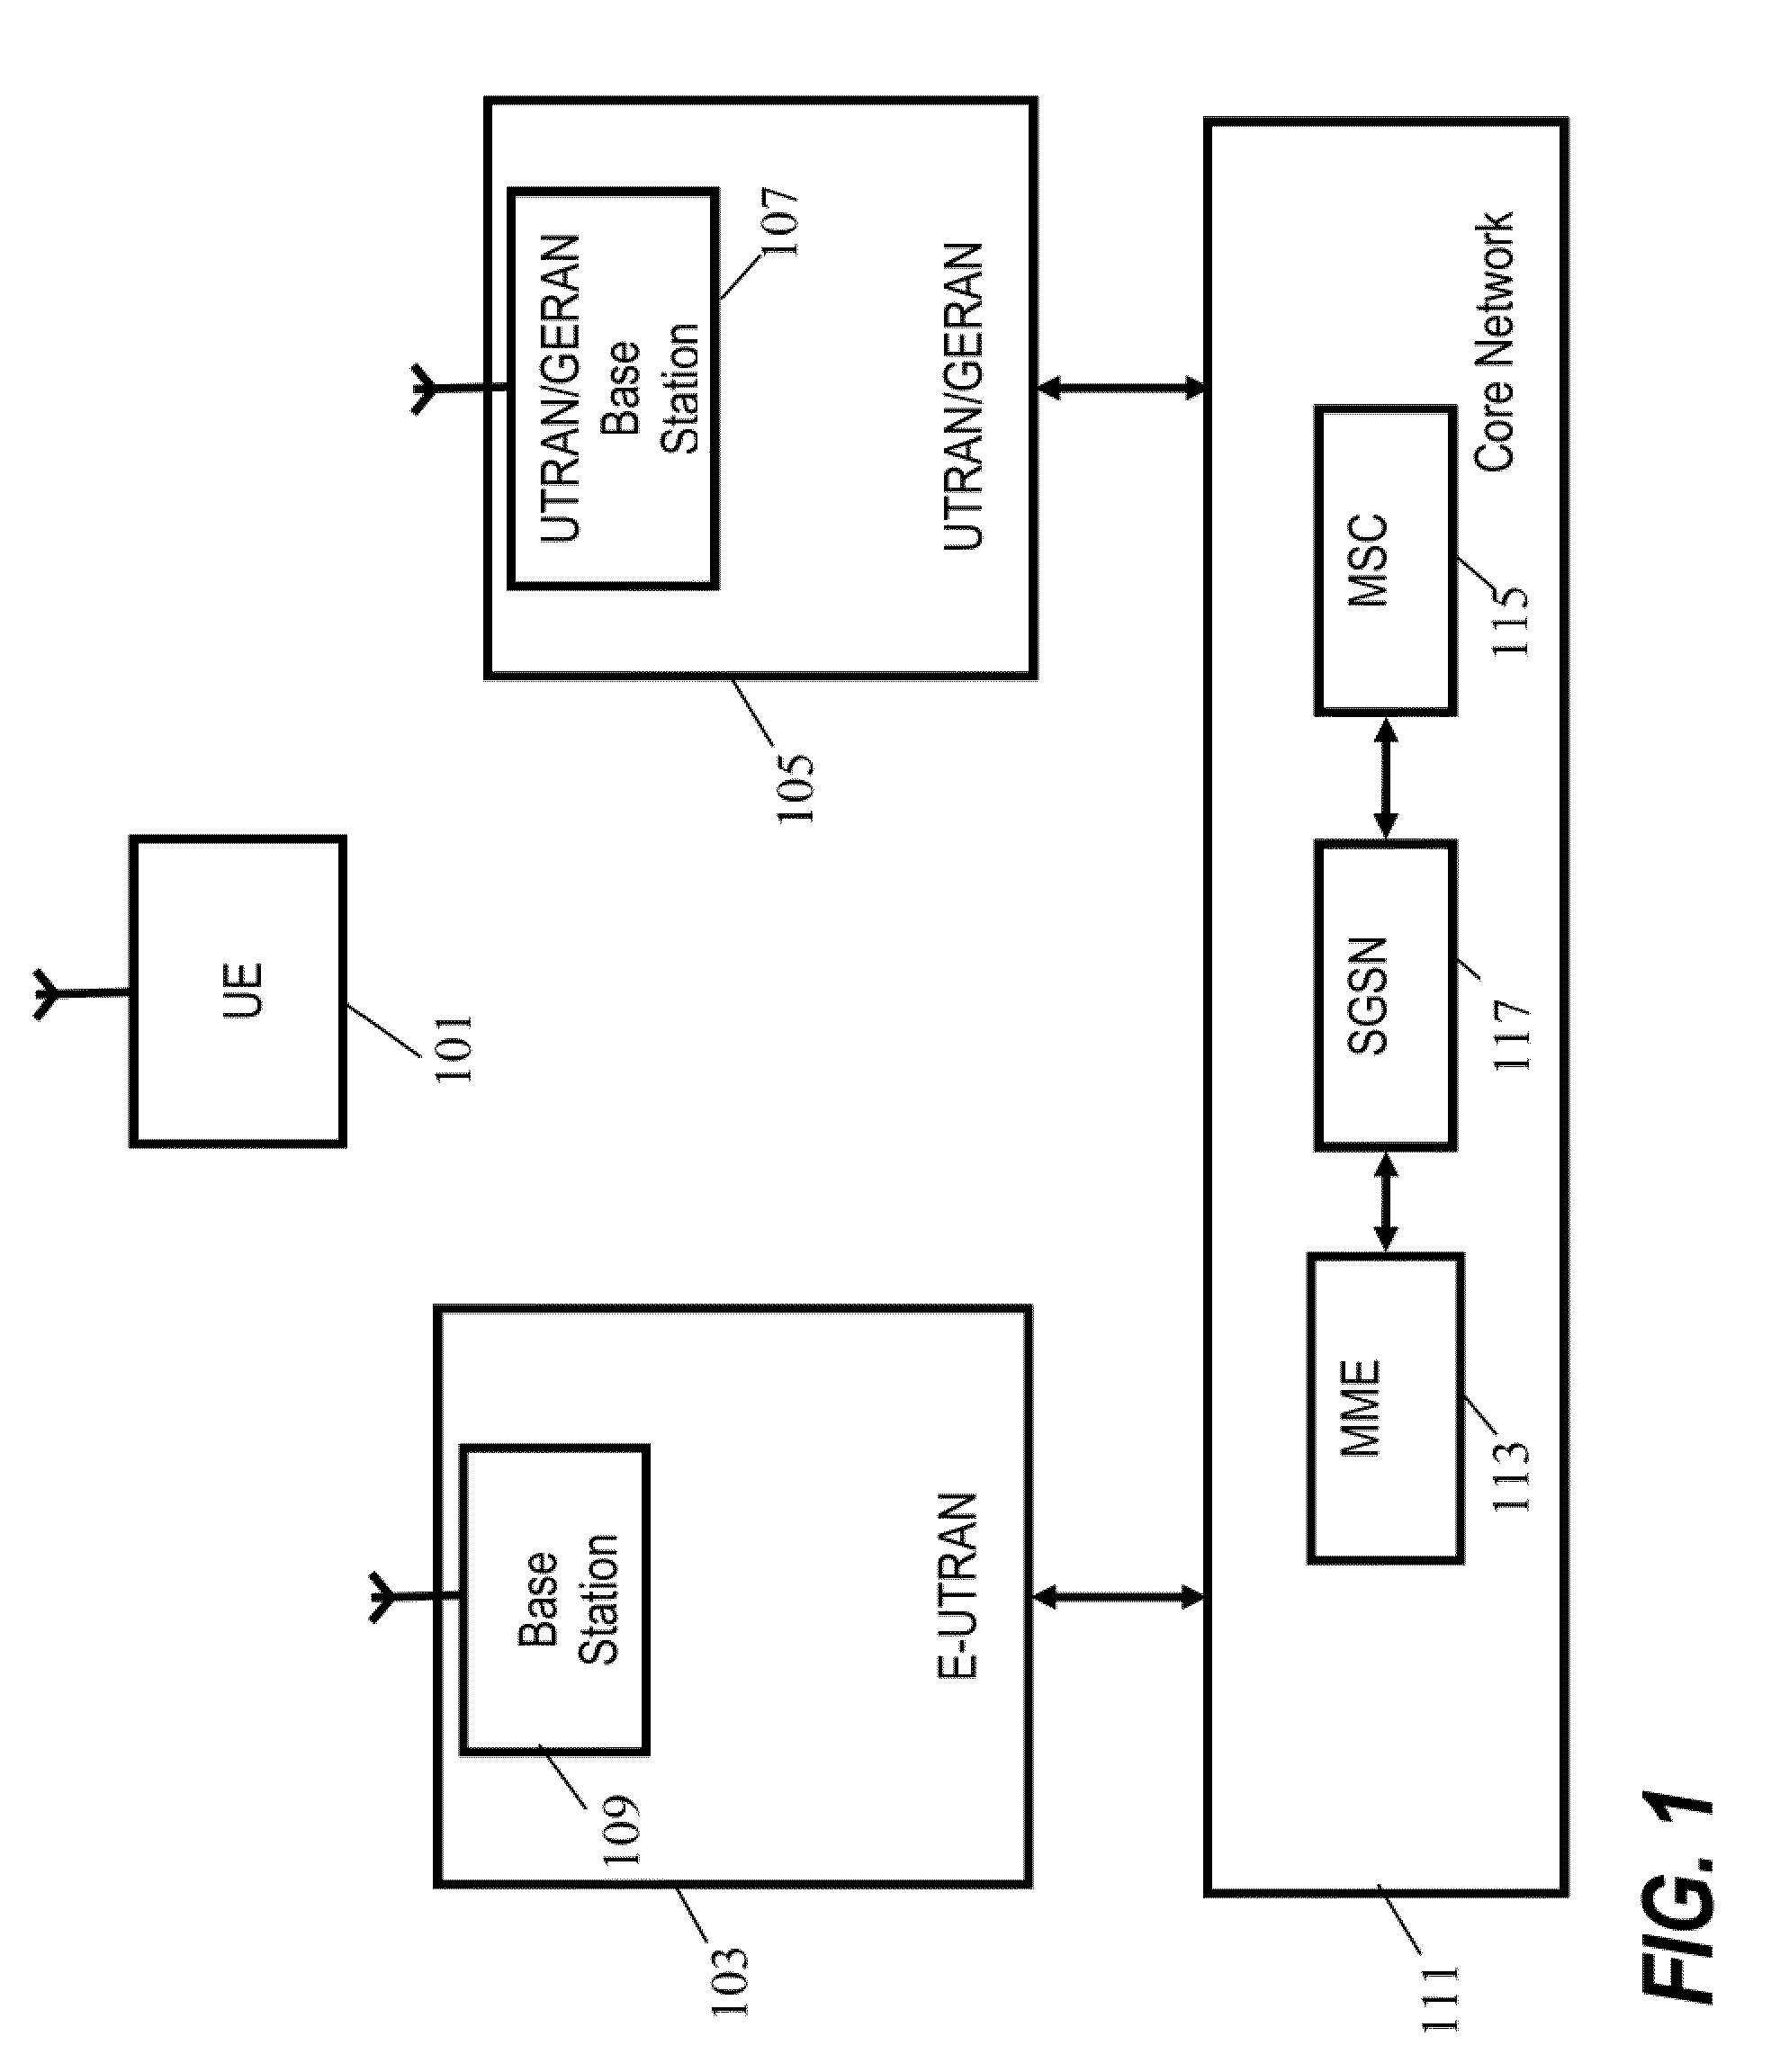 Cellular communication system and method of operation therefor